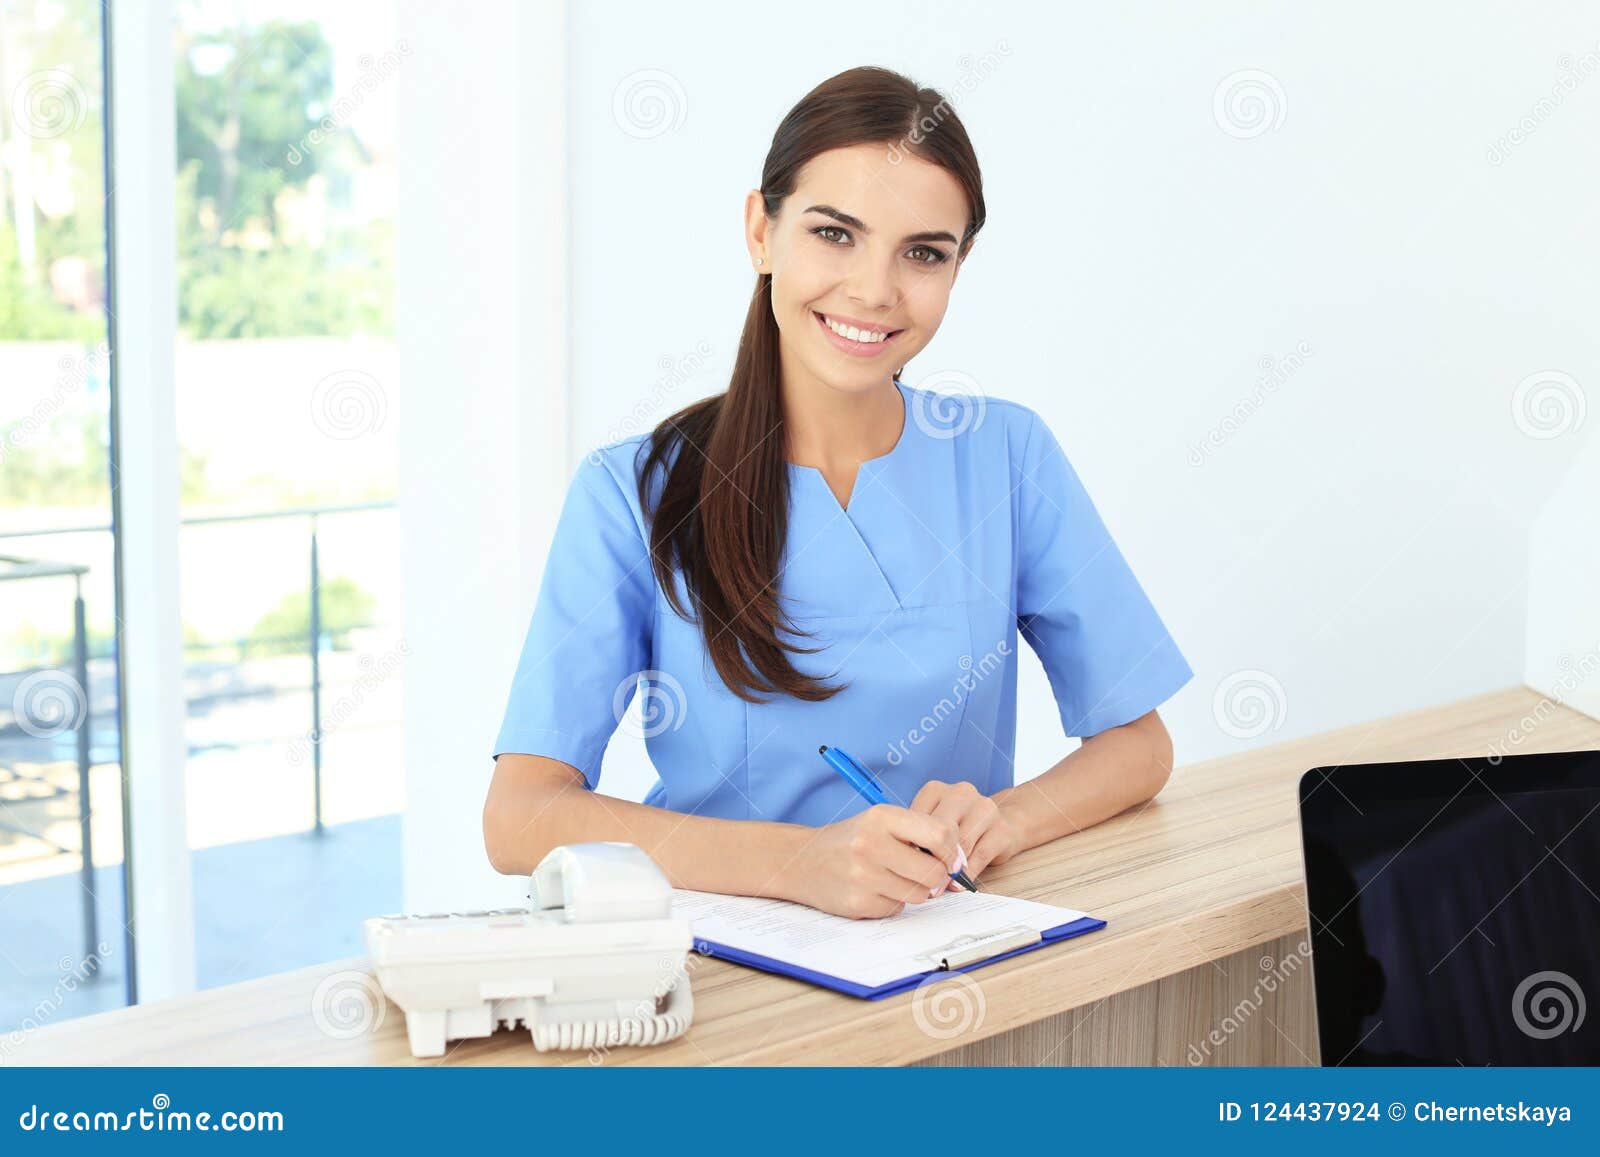 female medical assistant at workplace in clinic